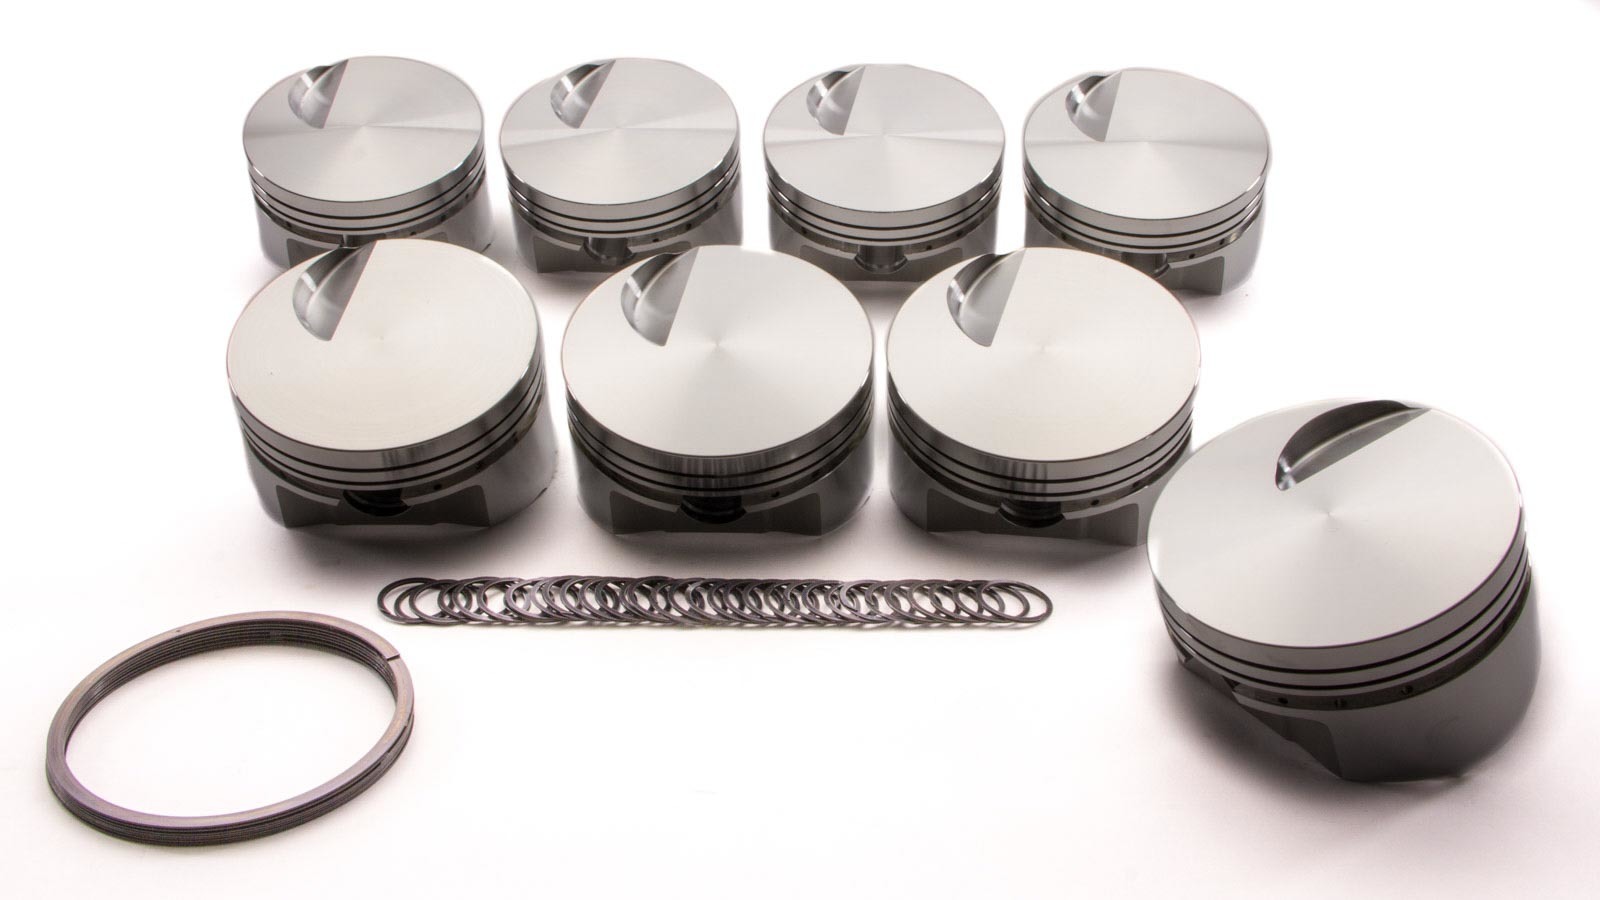 SRP Pistons 142981 Piston, Flat Top, Forged, 4.320 in Bore, 1/16 x 1/16 x 3/16 in Ring Grooves, Minus 3.00 cc, Big Block Chevy, Set of 8